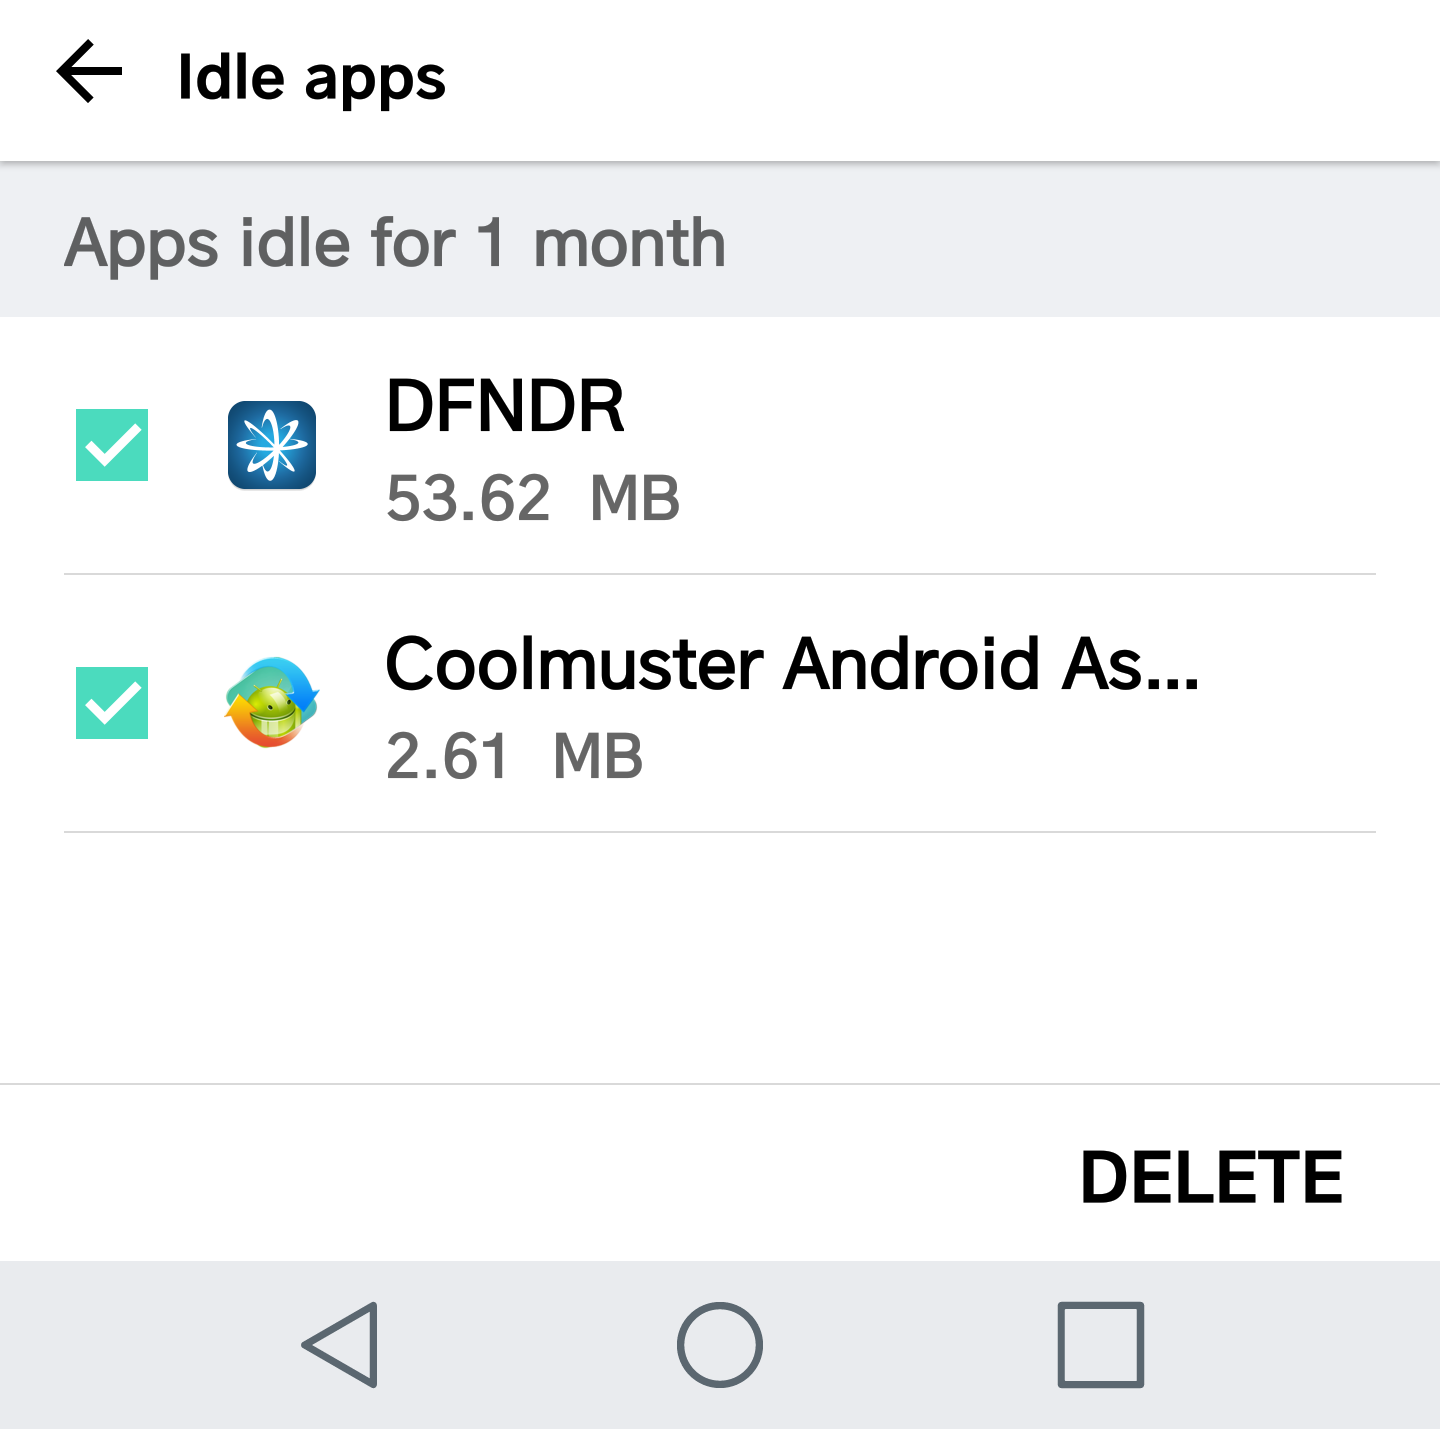 idle apps haven't been launched in a month, android